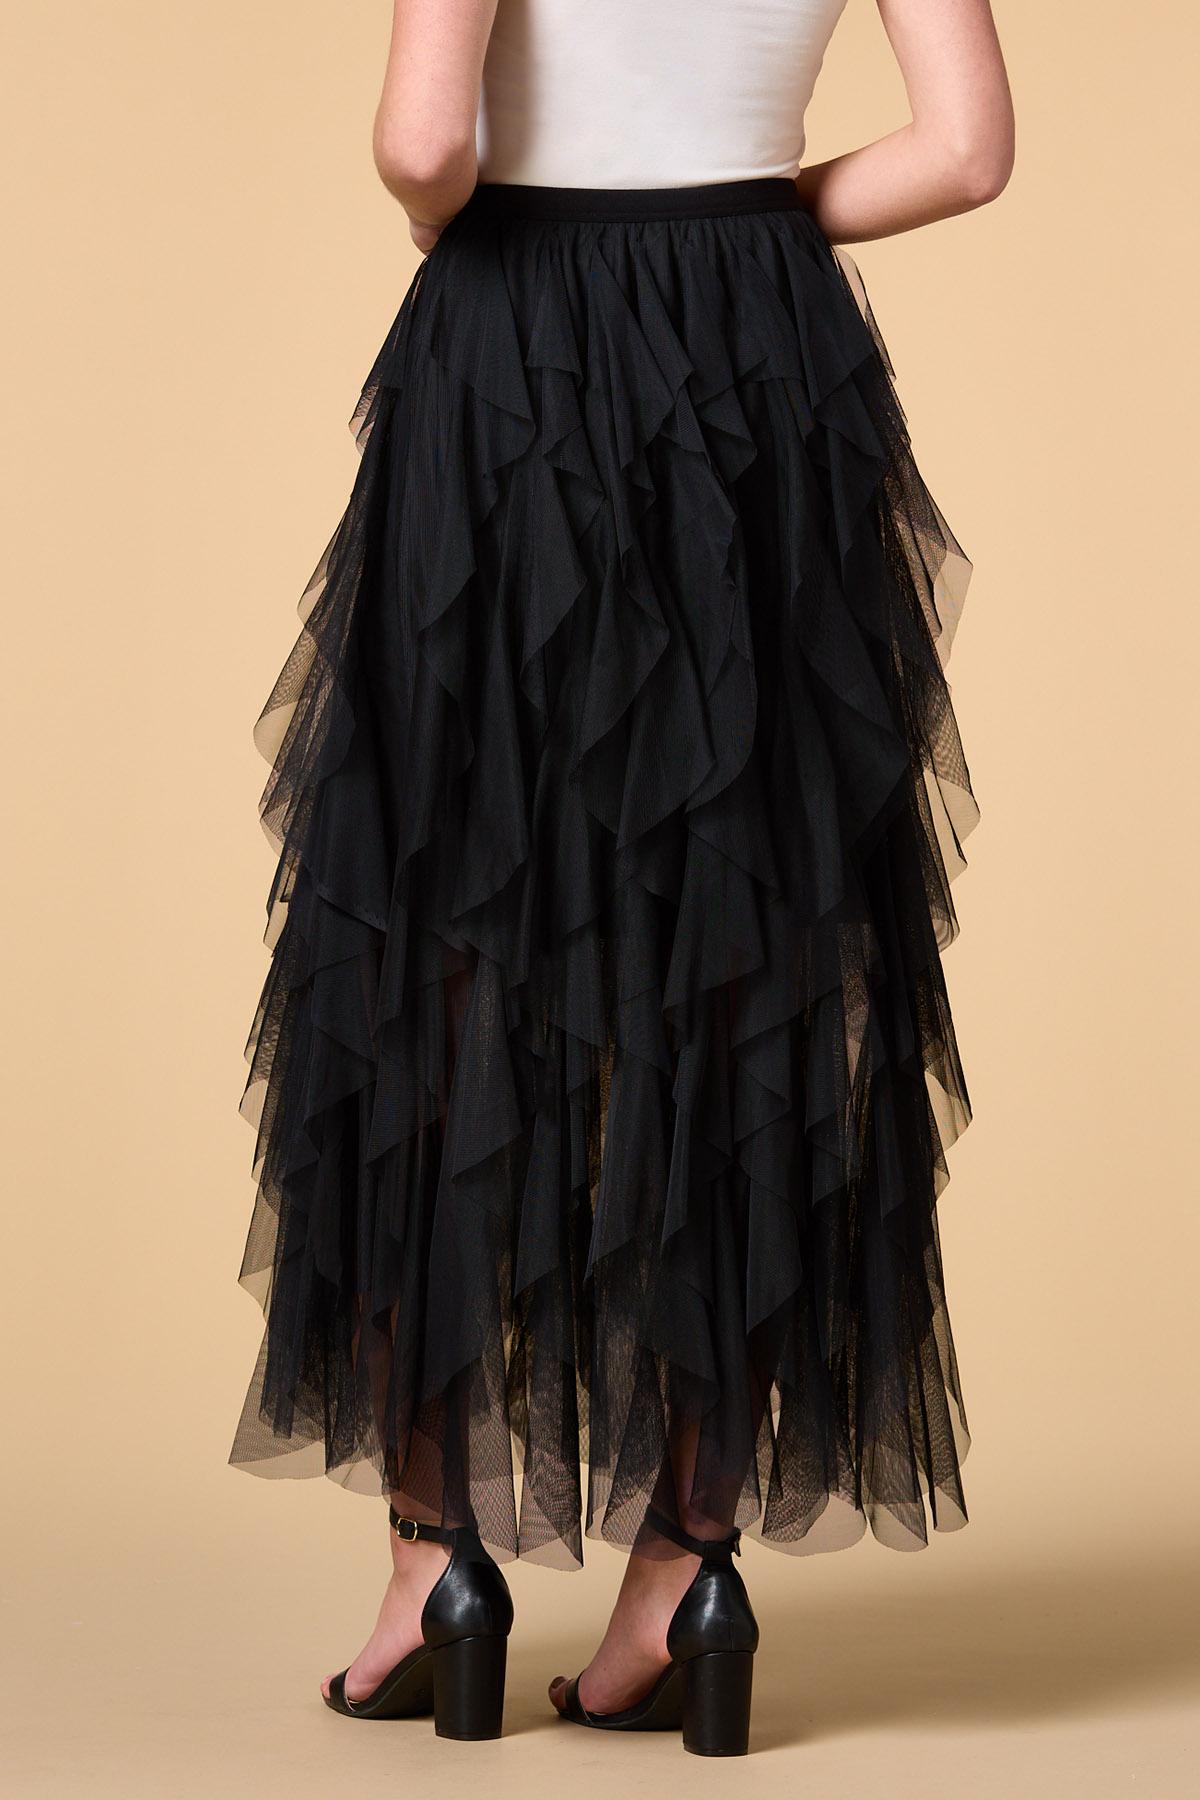 Versona  made you tulle maxi skirt